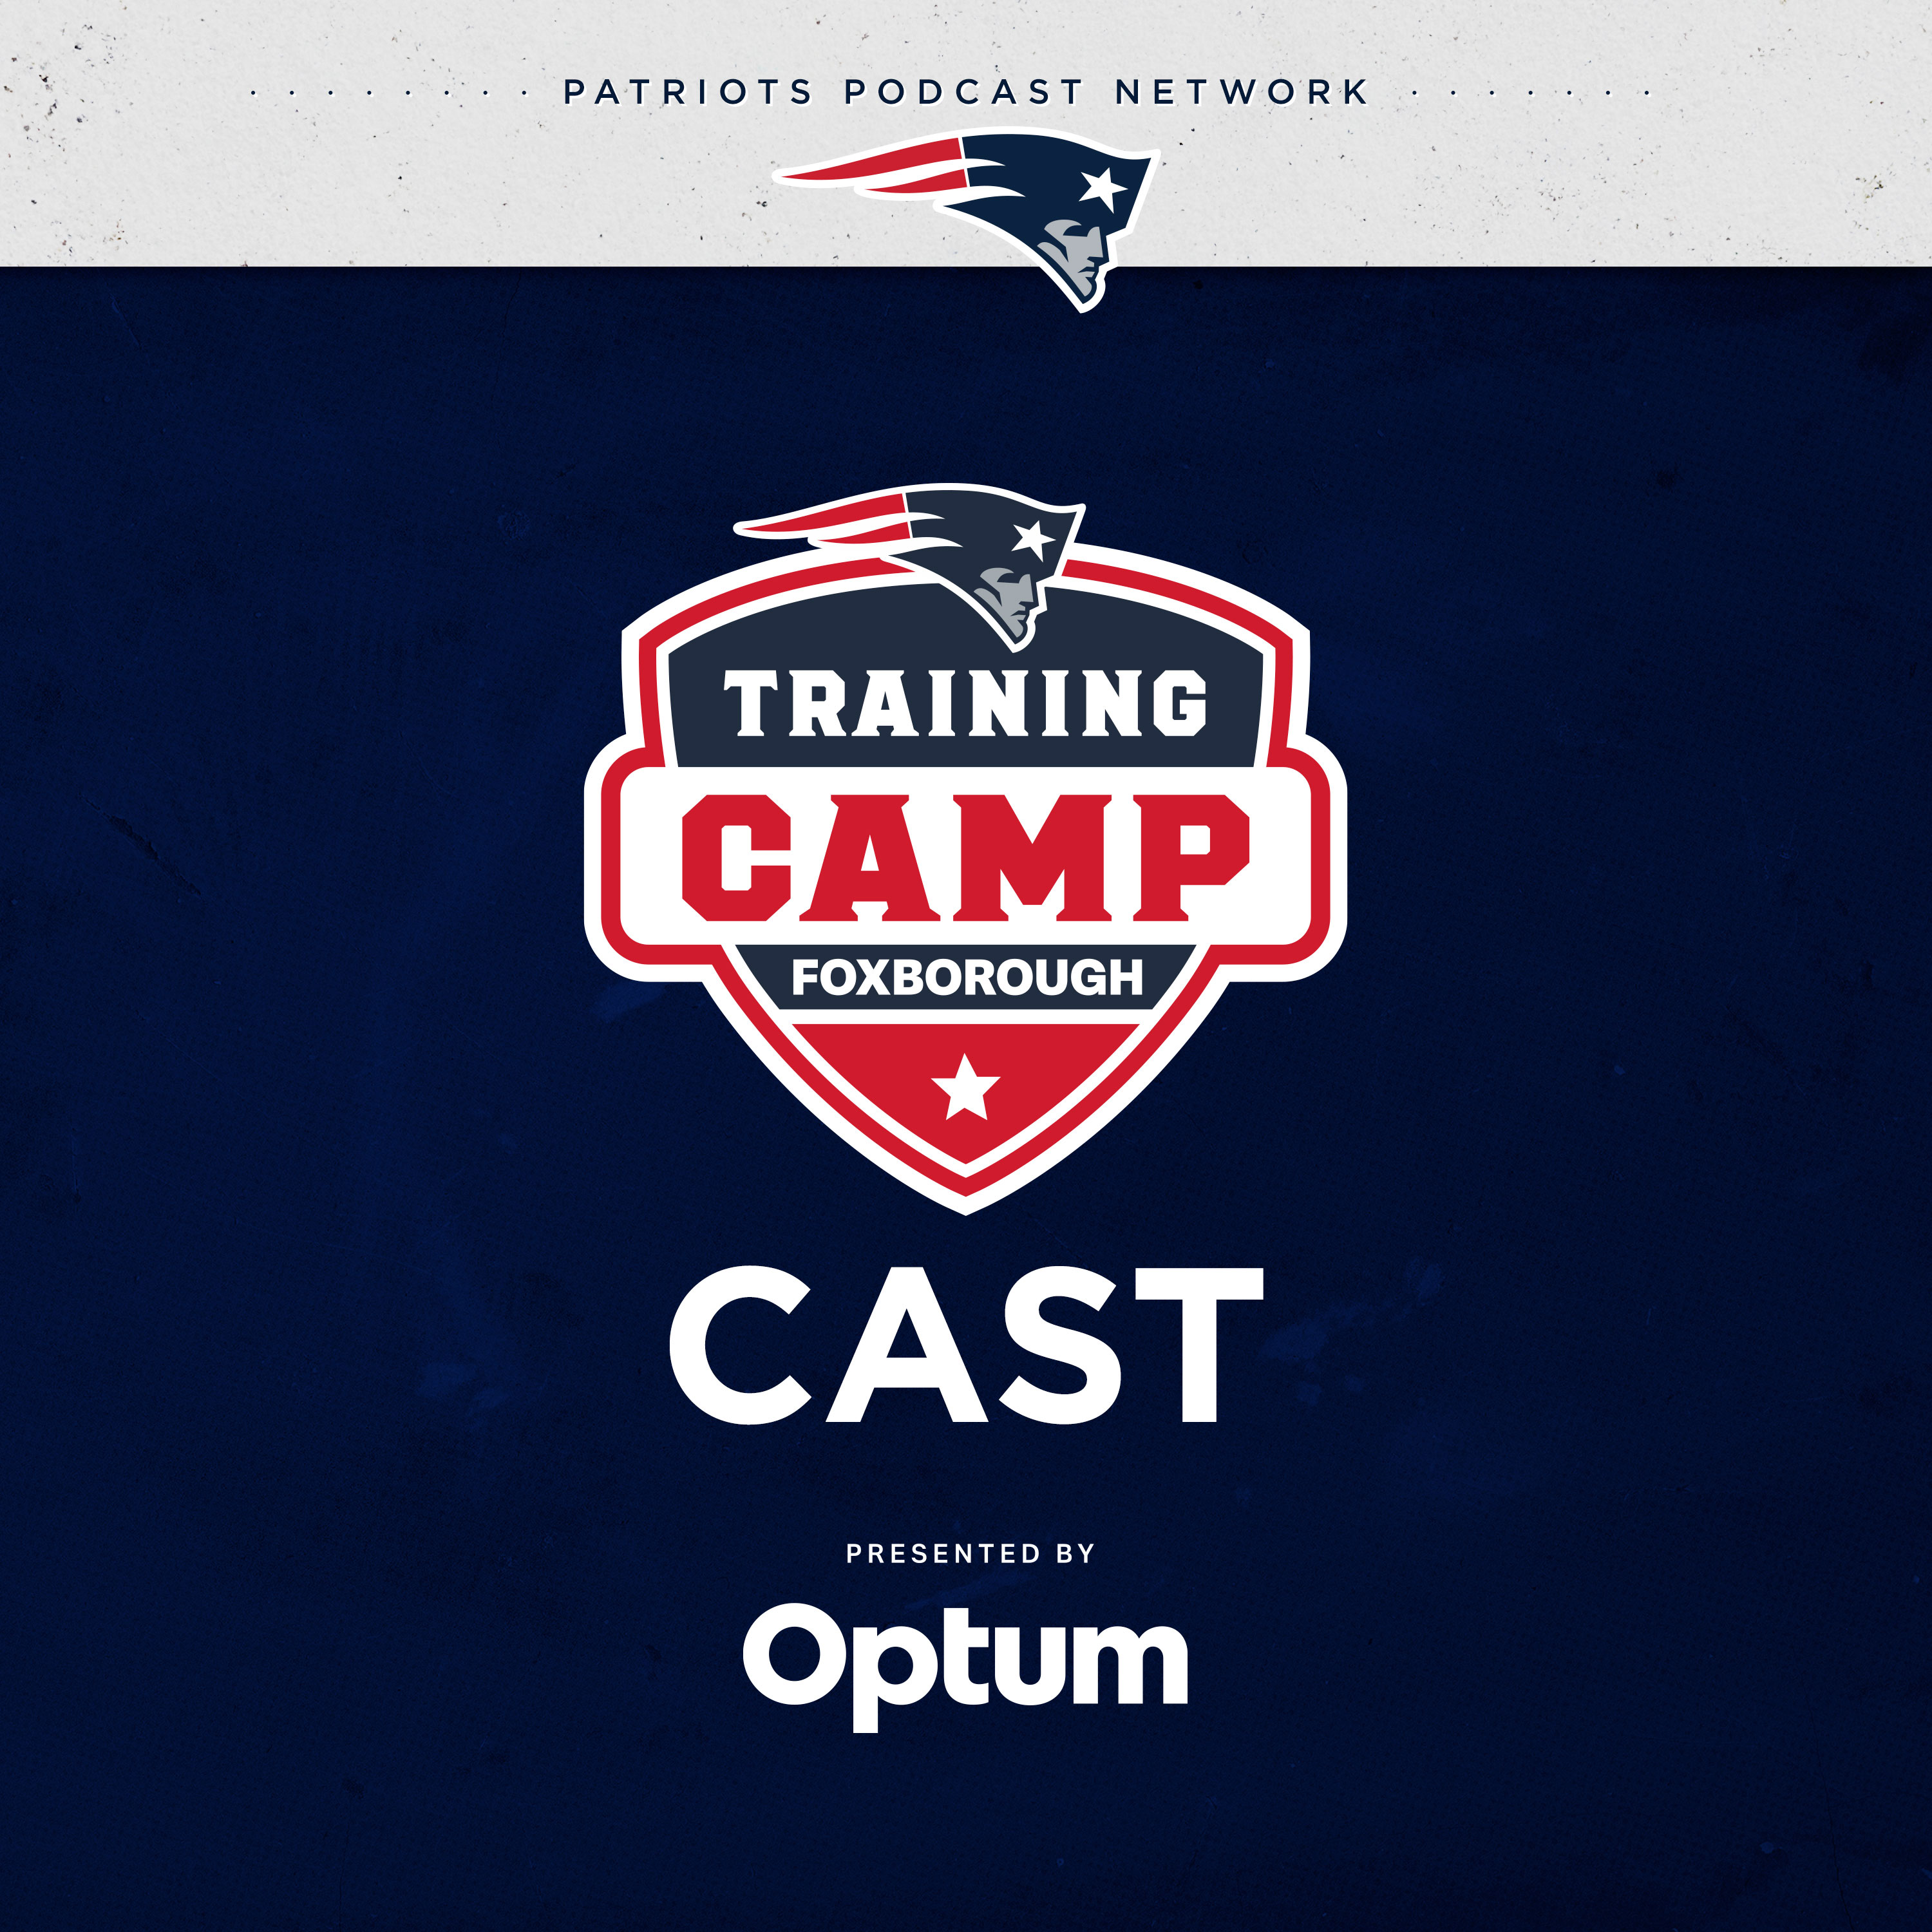 Training Camp Cast 8/6: Day 10 Recap, Defense Takes the Day, O-Line Concerns Increase